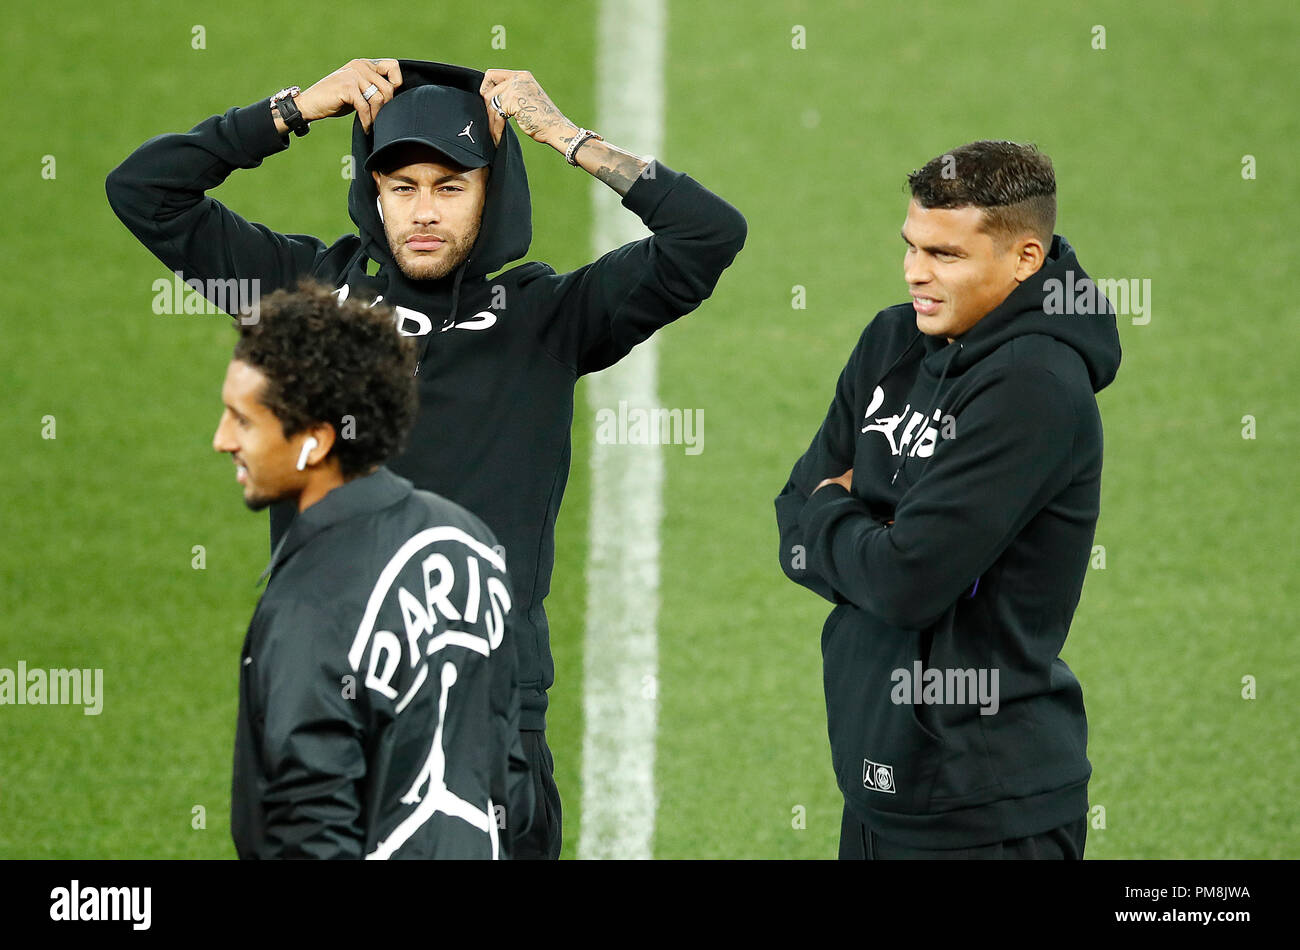 Paris Saint-Germain's Neymar (left) with Marquinhos and Thiago Silva (right) during a walk around the Anfield pitch, Liverpool. Stock Photo